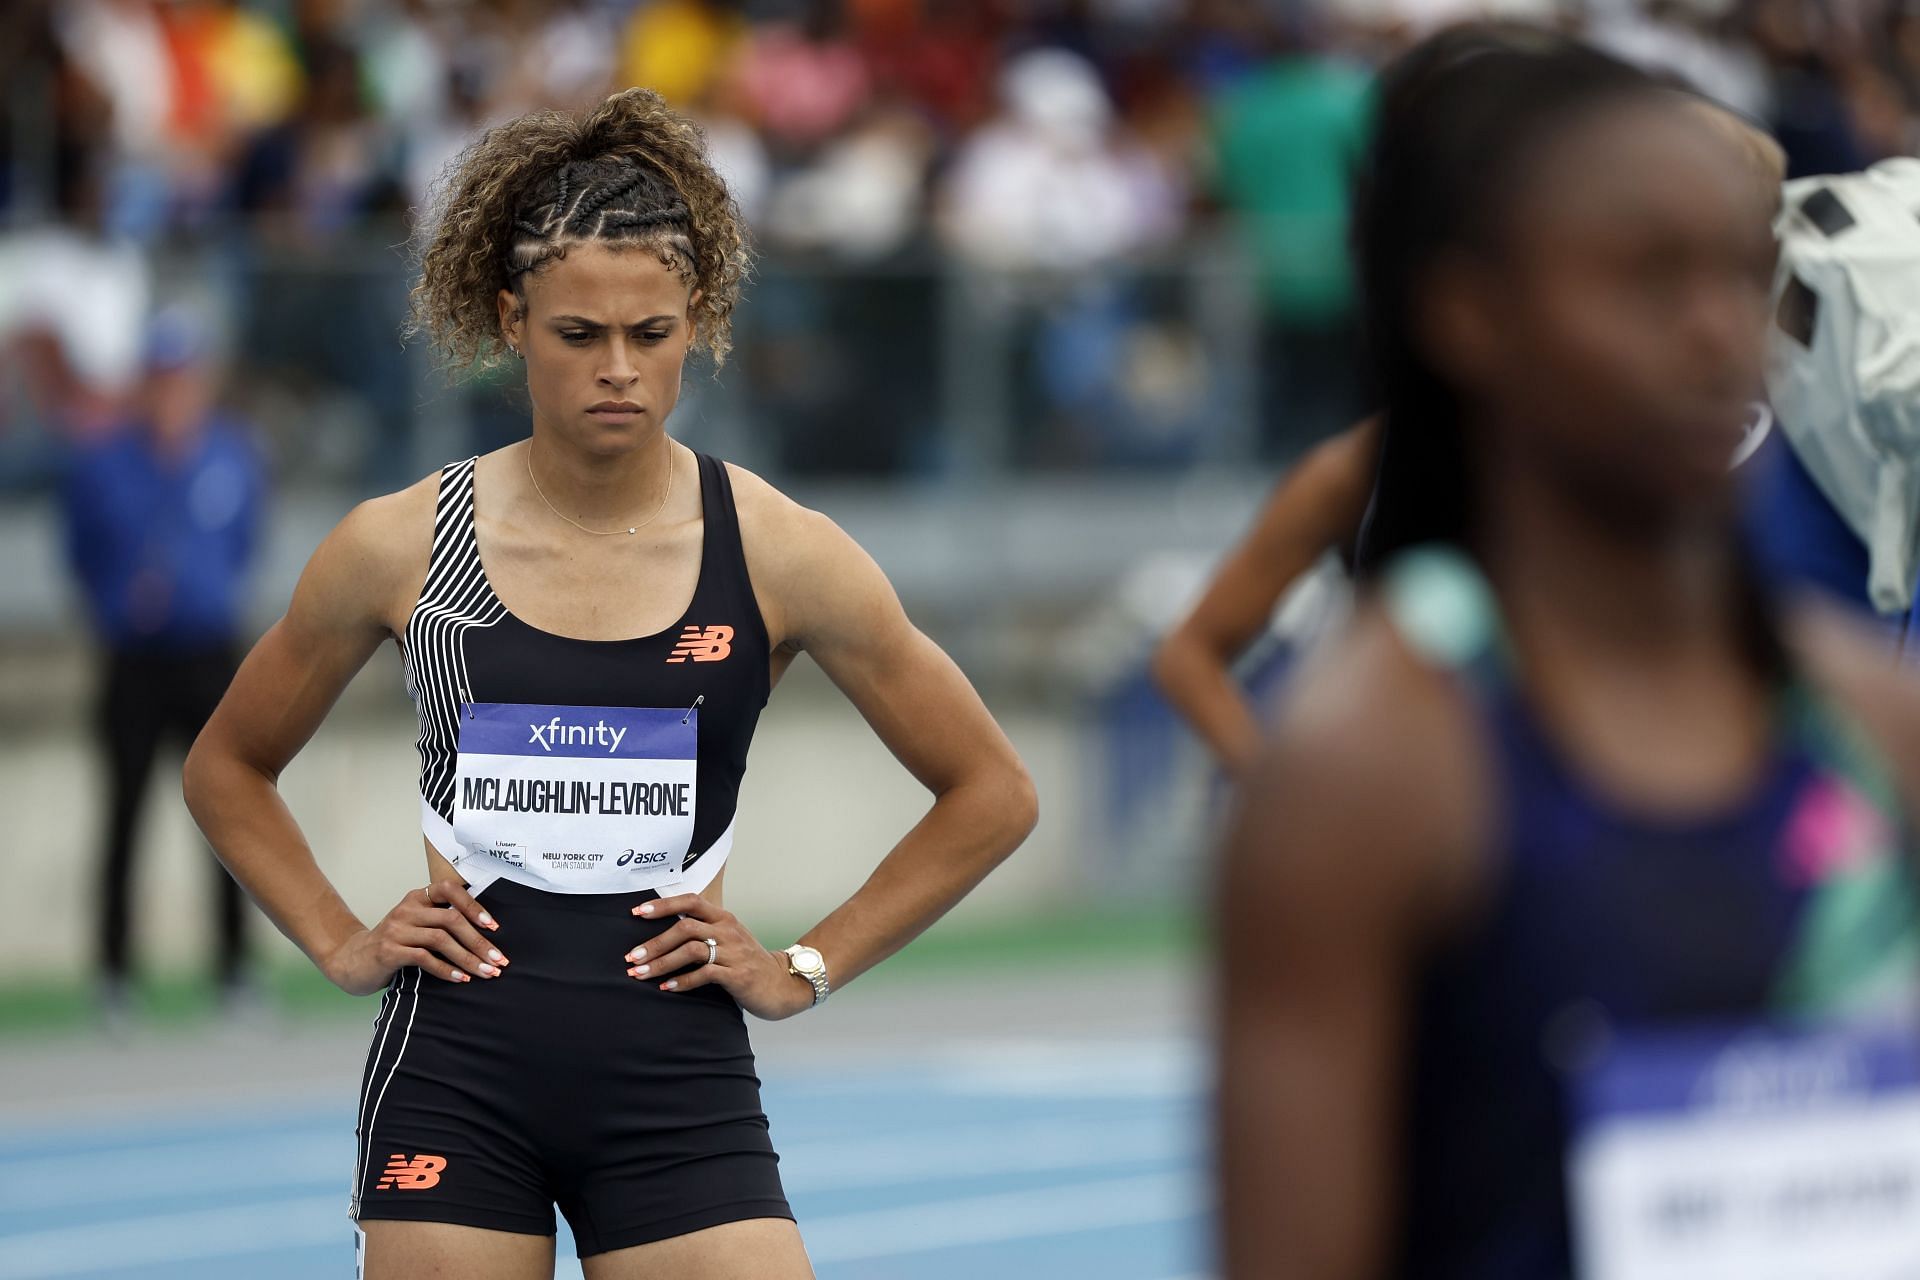 Sydney McLaughlin-Levrone prepares to compete in the Women&#039;s 400m at the Xfinity during the 2023 USATF NYC Grand Prix at Icahn Stadium in New York City.